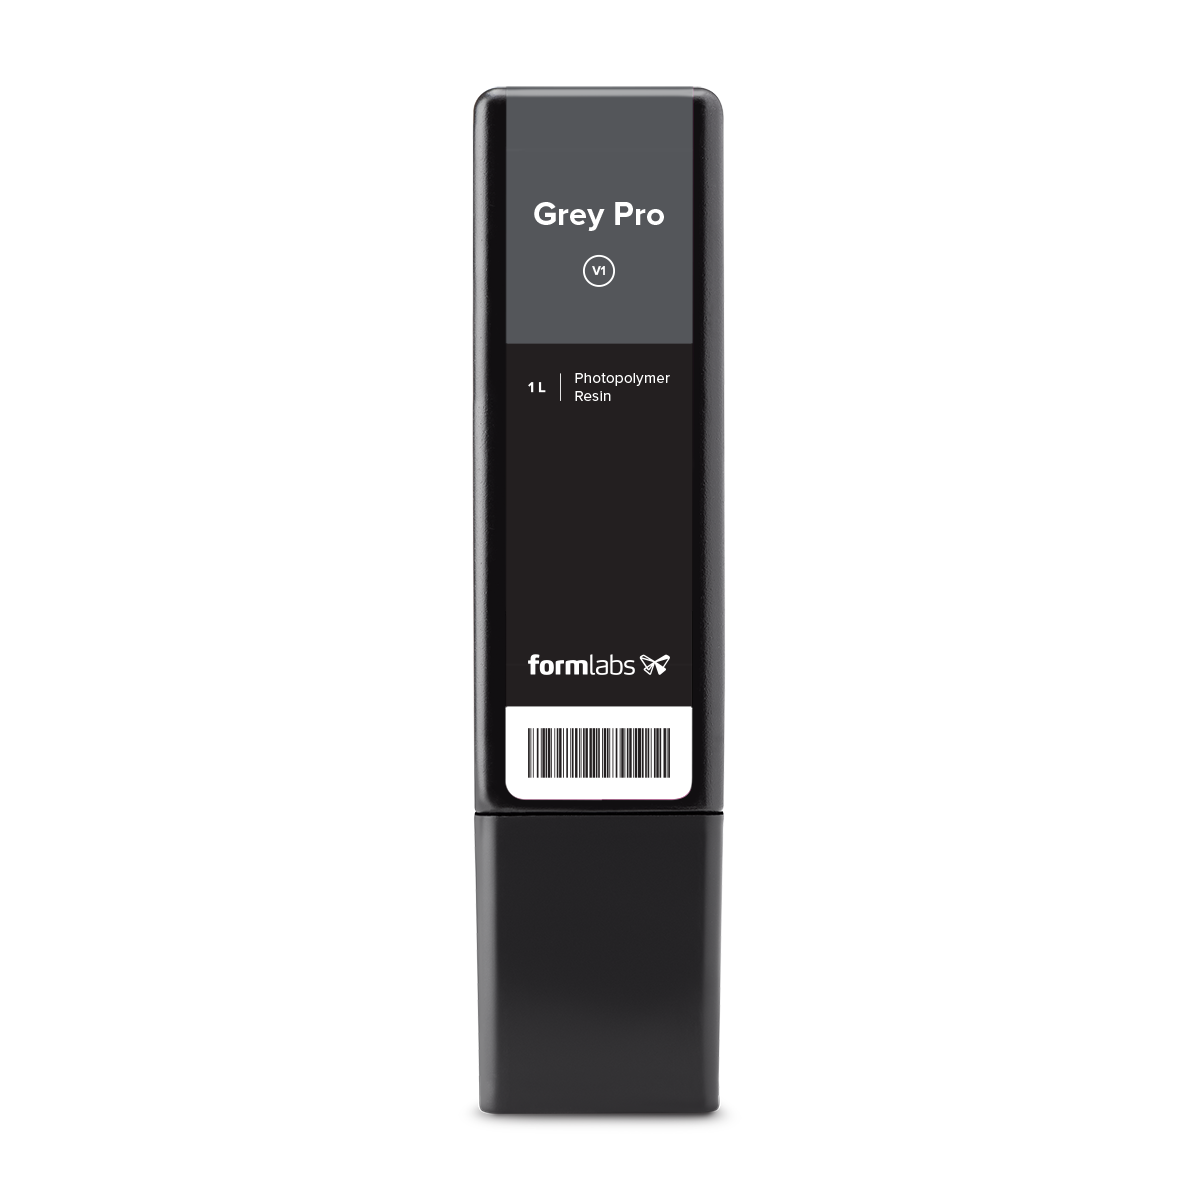 Grey Pro resin cartridge. Shop additive manufacturing printers, resins and accessories | eacadditive.com.